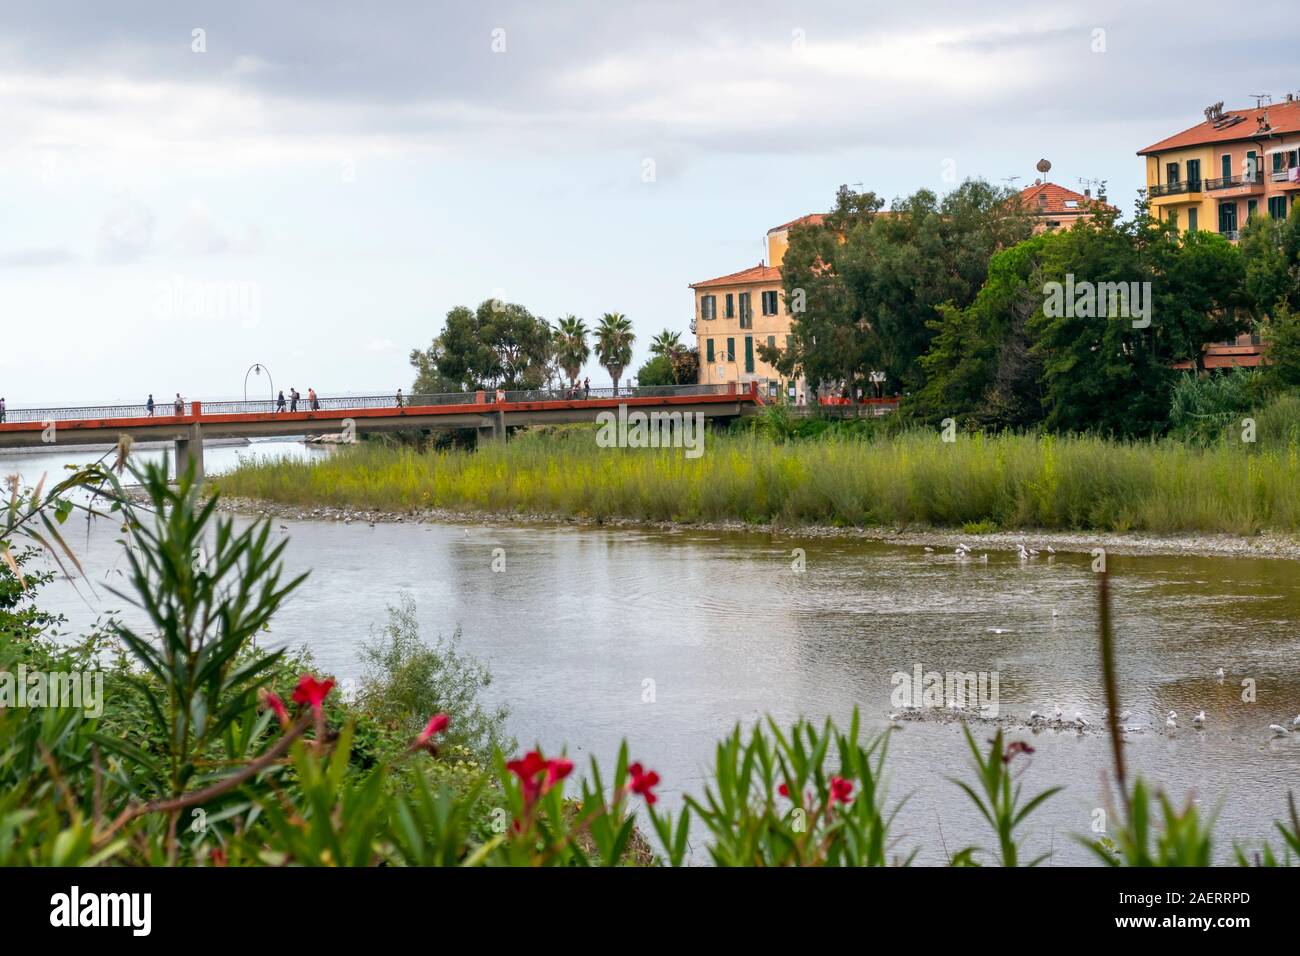 Tourists cross the bridge over the river Roia separating the two sections of Ventimiglia on the Italian Riviera. Stock Photo